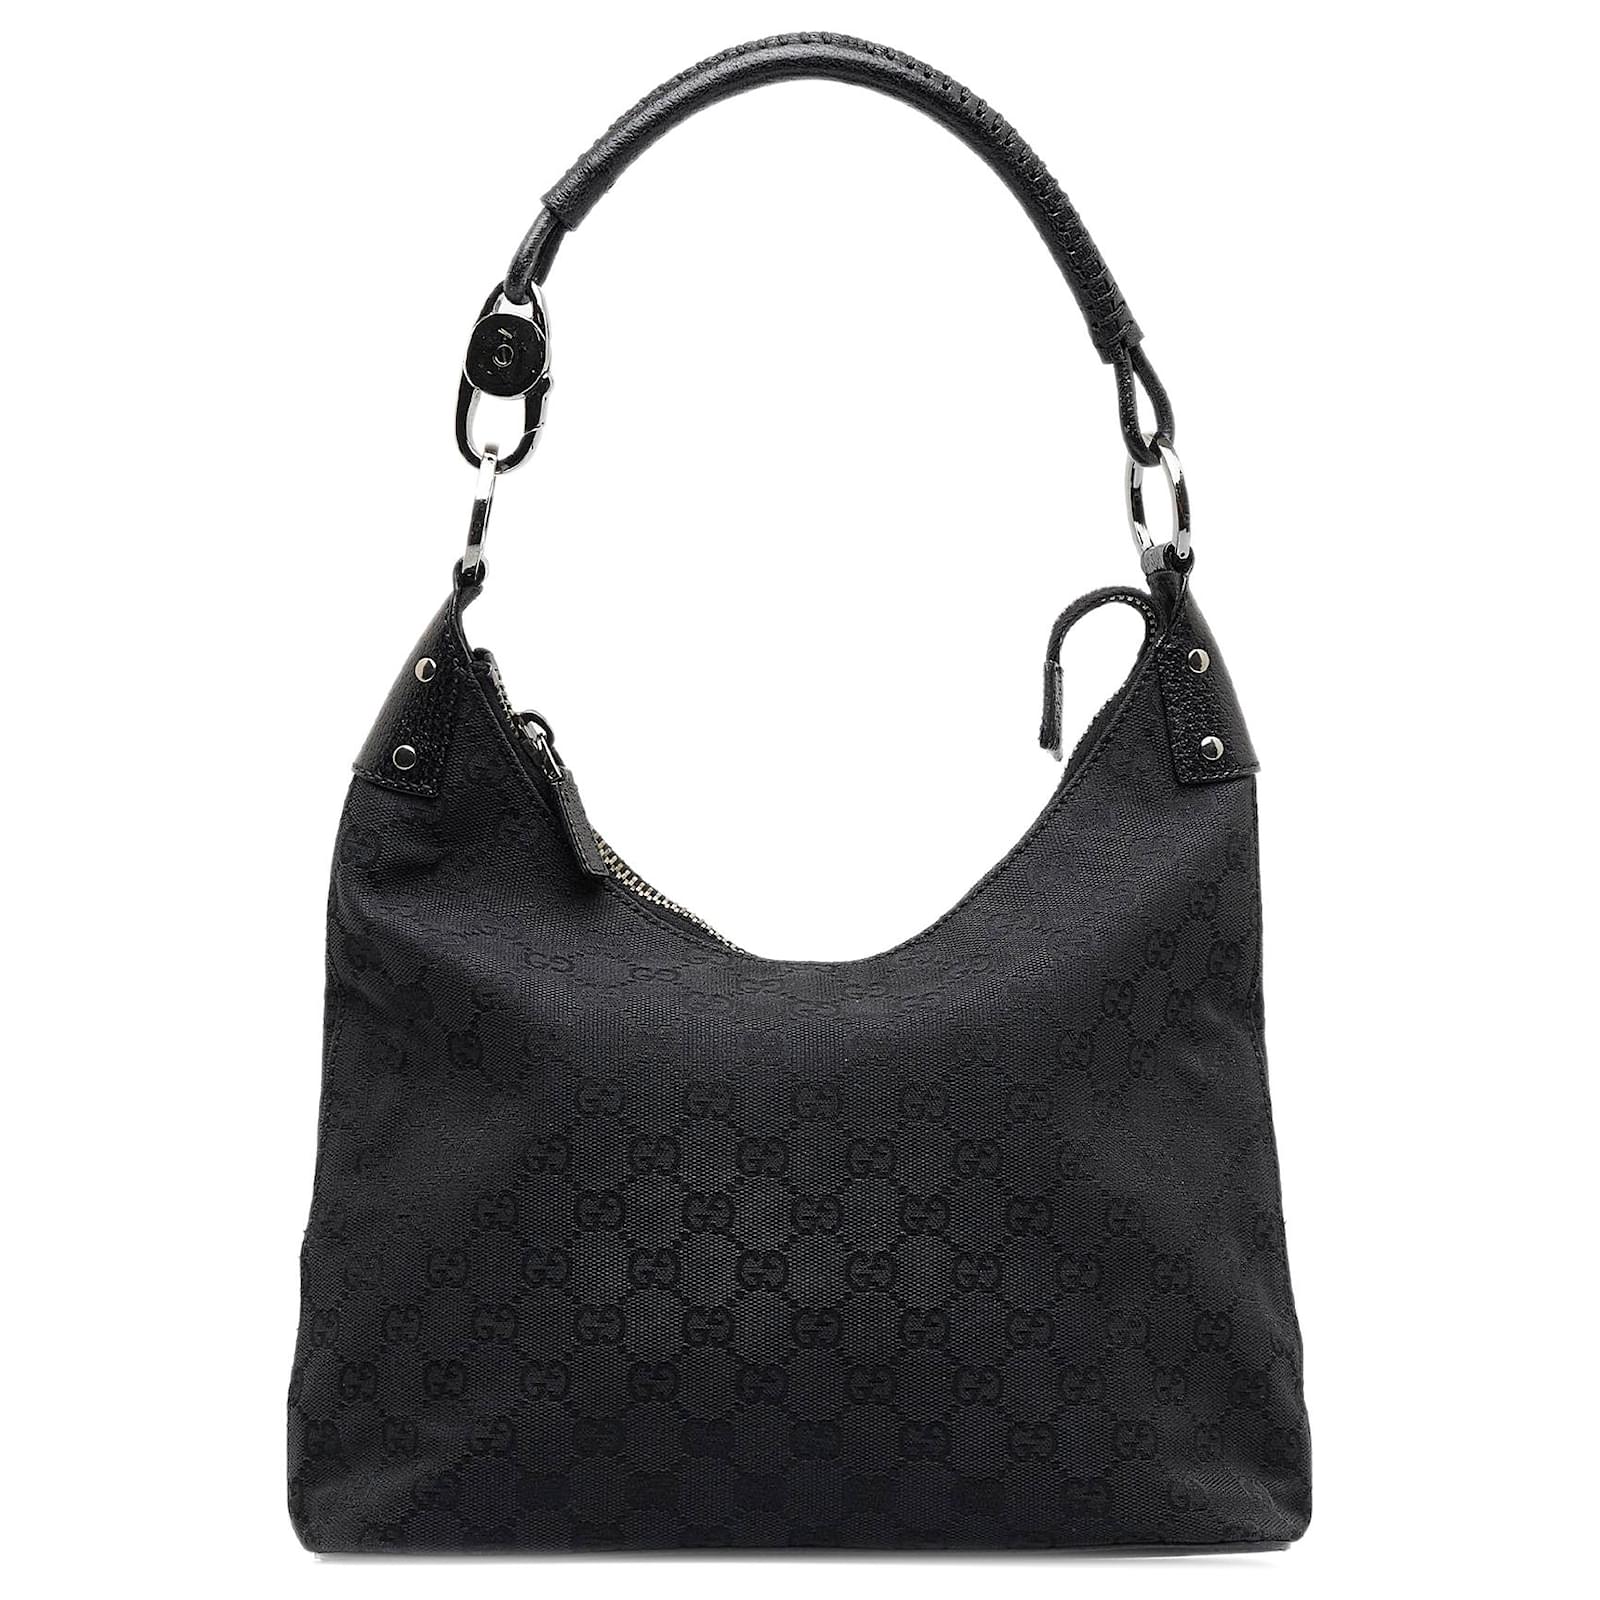 Gucci Black GG Canvas and Leather Vintage Hobo